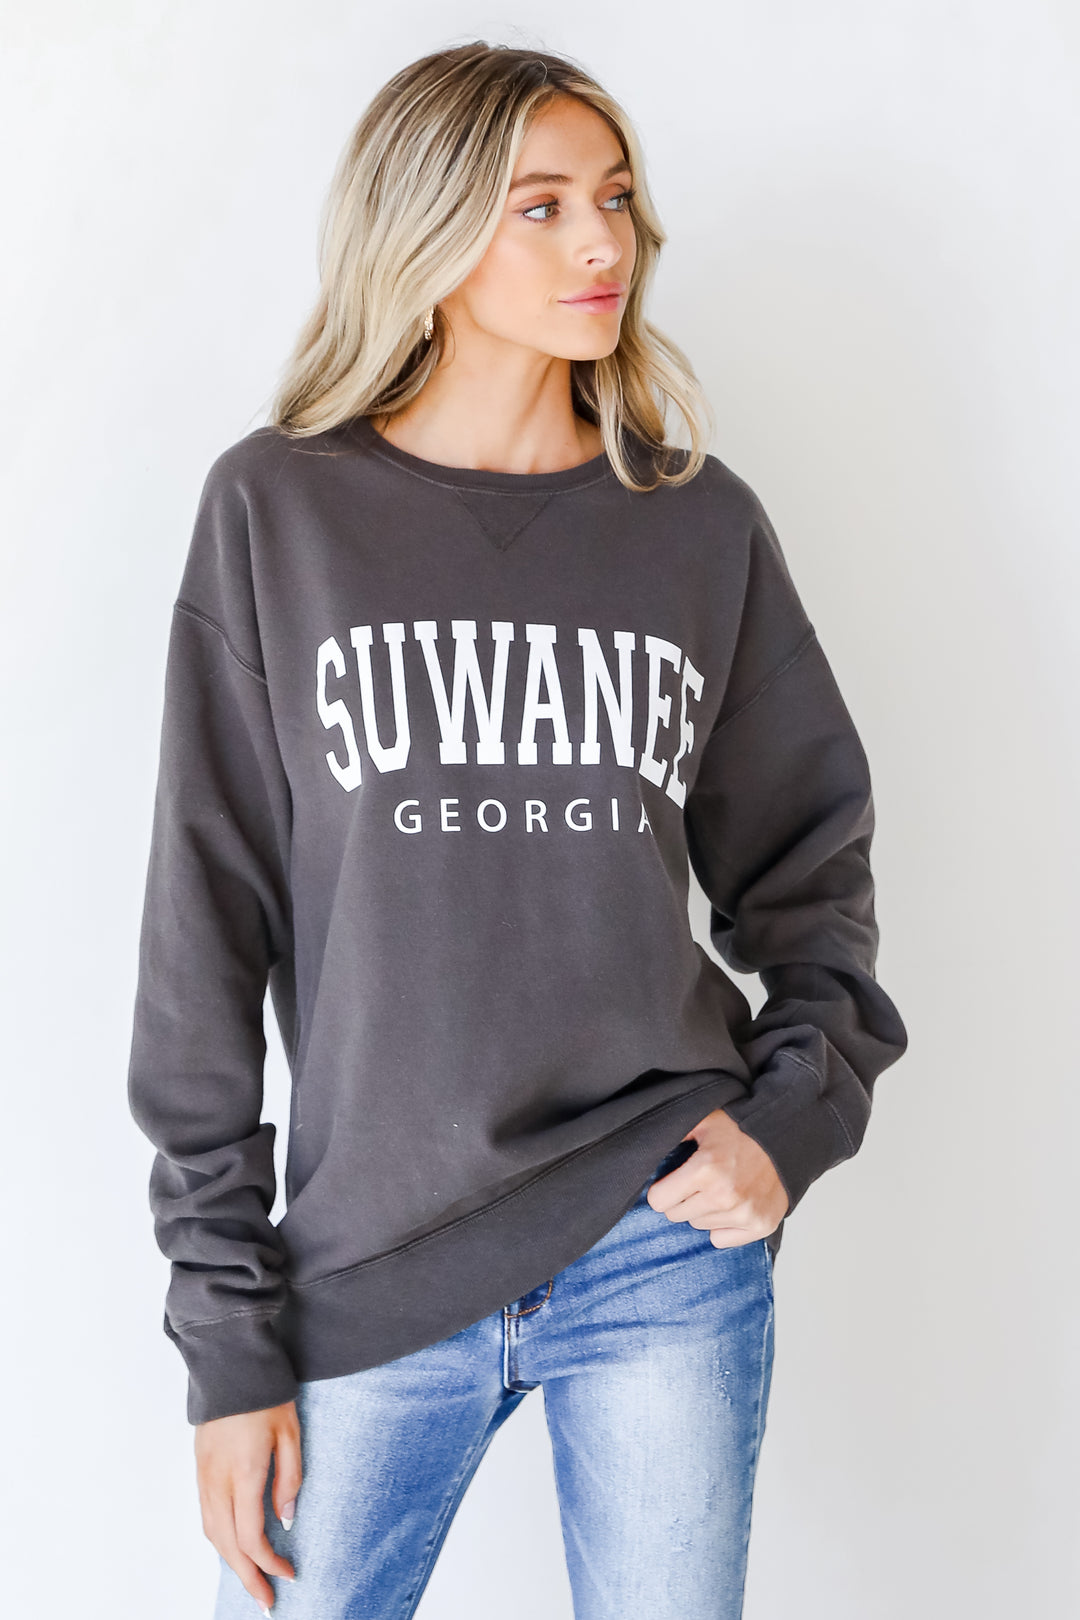 Suwanee Georgia Pullover from dress up